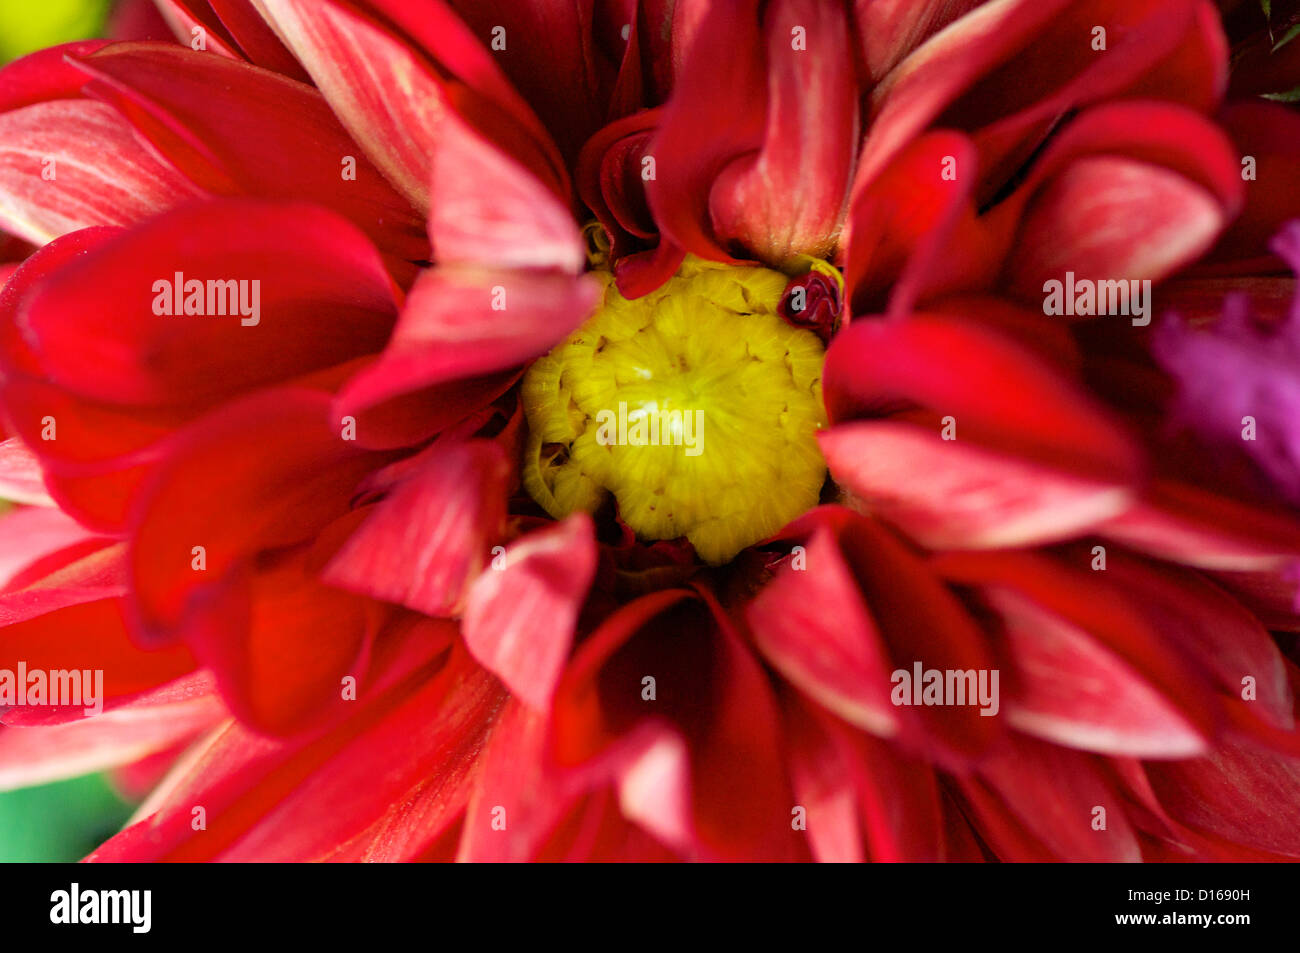 Abstract red dahlia close up looks like fire Stock Photo